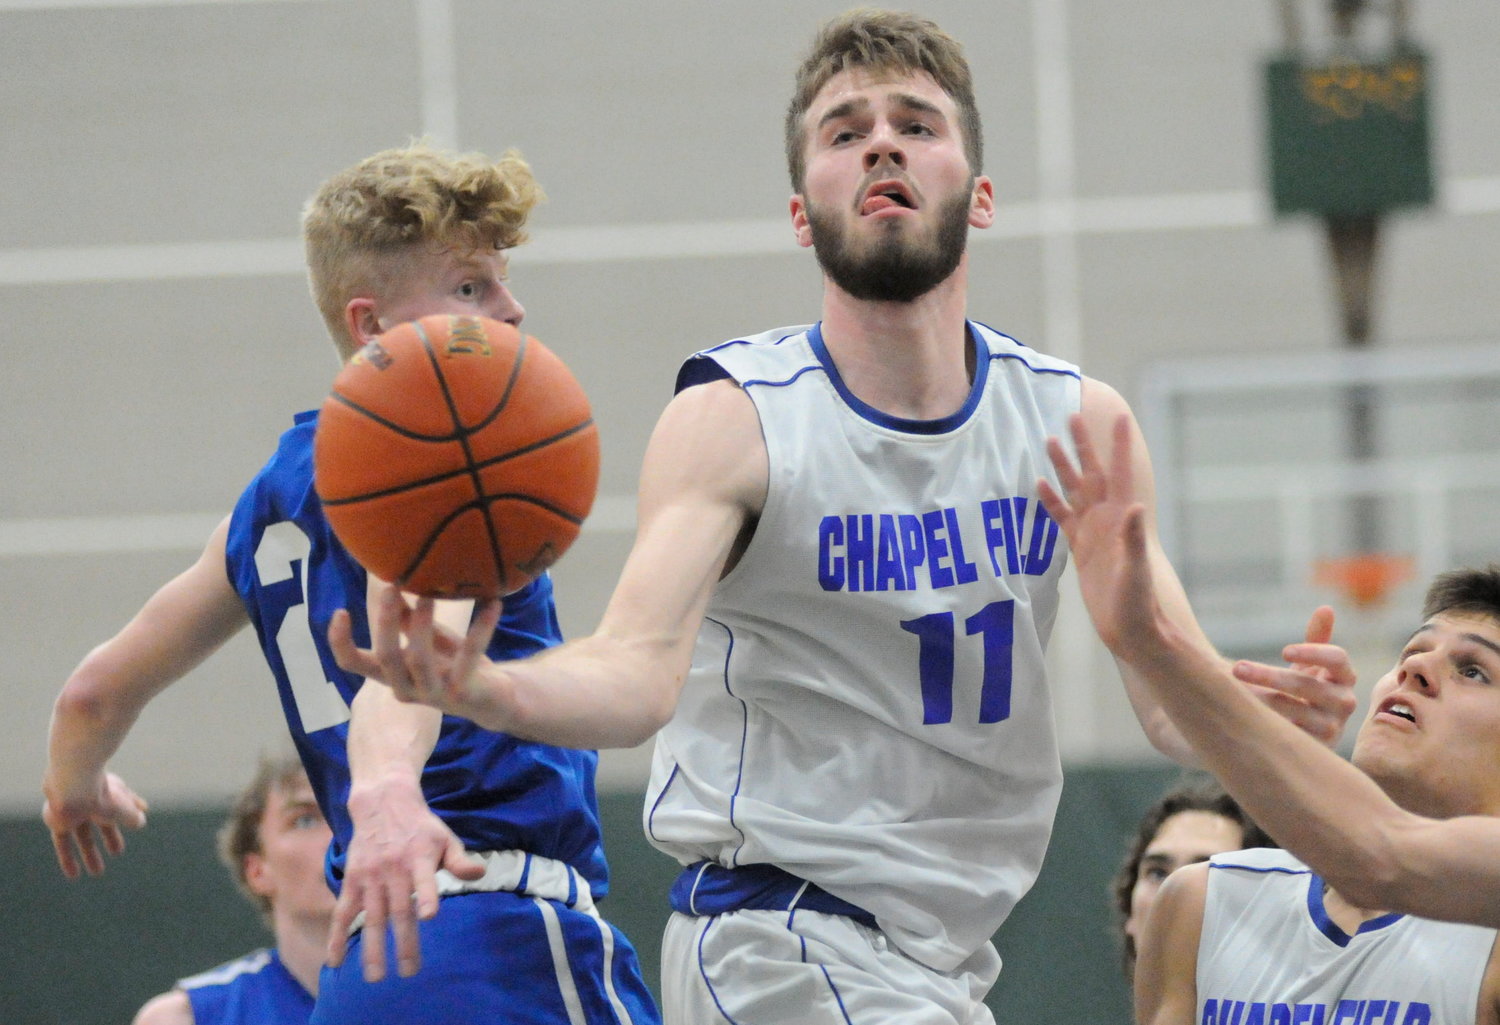 Not to be contained. Chapel Field’s Mikey Bonagura cuts through the Blue Devils opposition, including Roscoe’s Aiden Johnson. Bonagura posted 8 points.